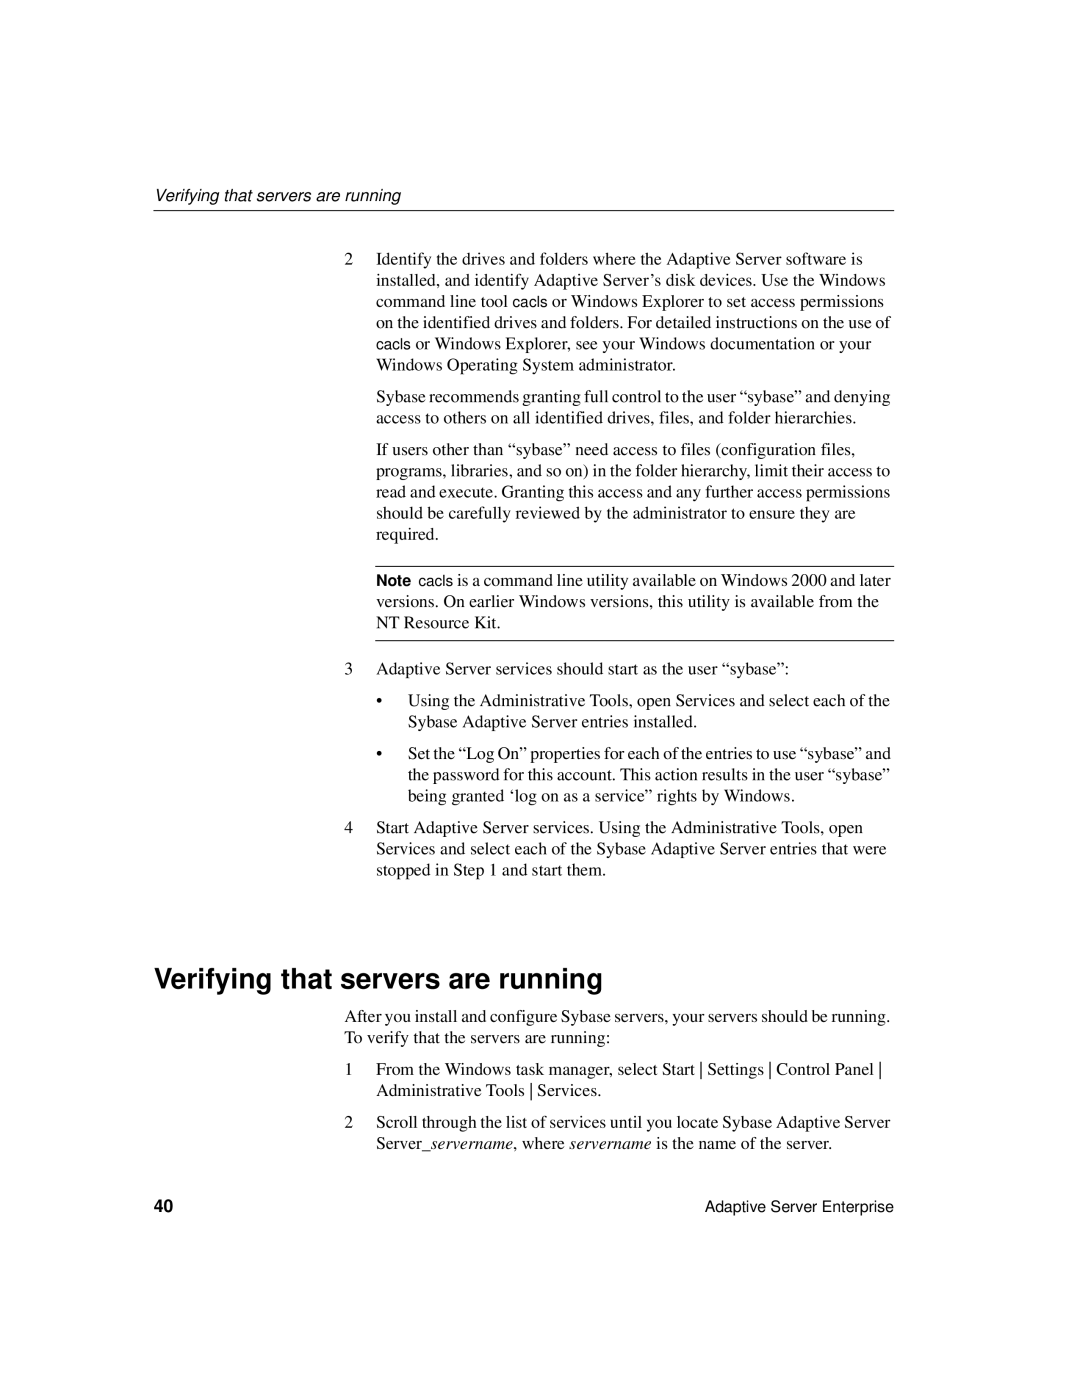 Sybase 15.0.2 manual Verifying that servers are running 